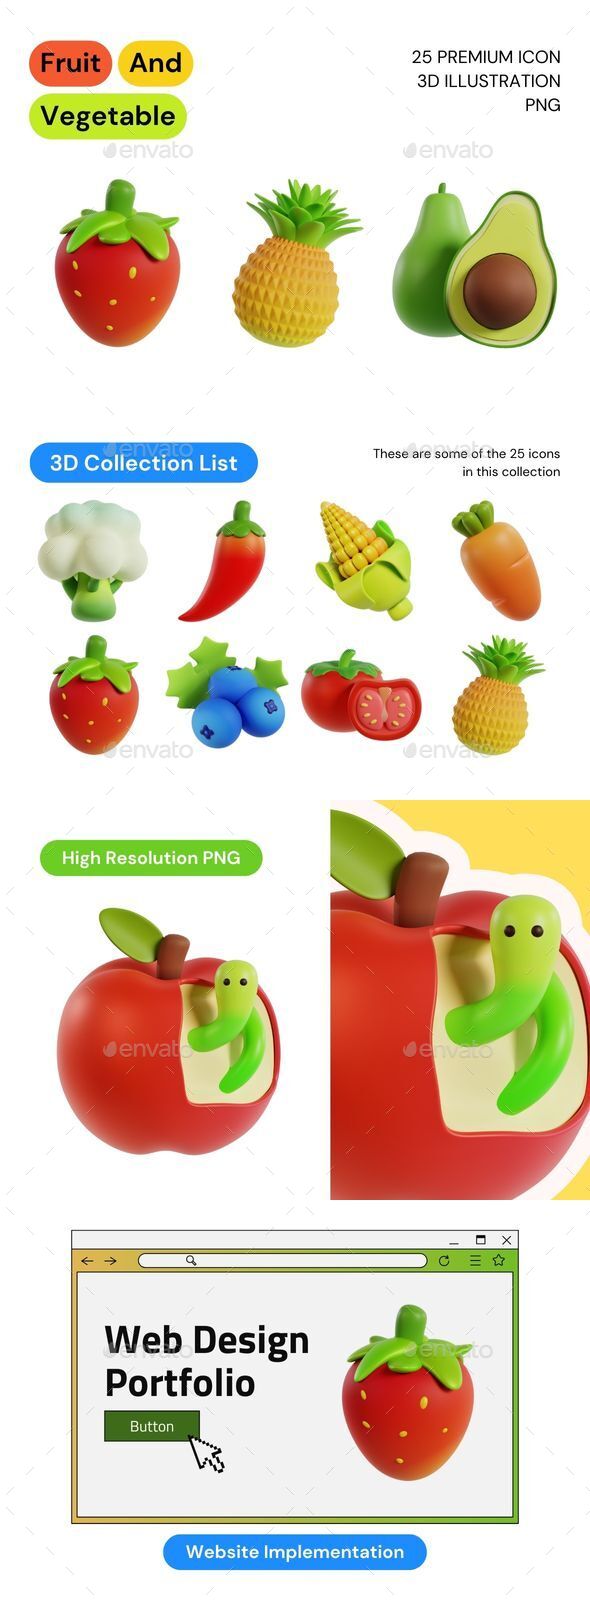 [DOWNLOAD]Fruits and Vegetables 3D Icon